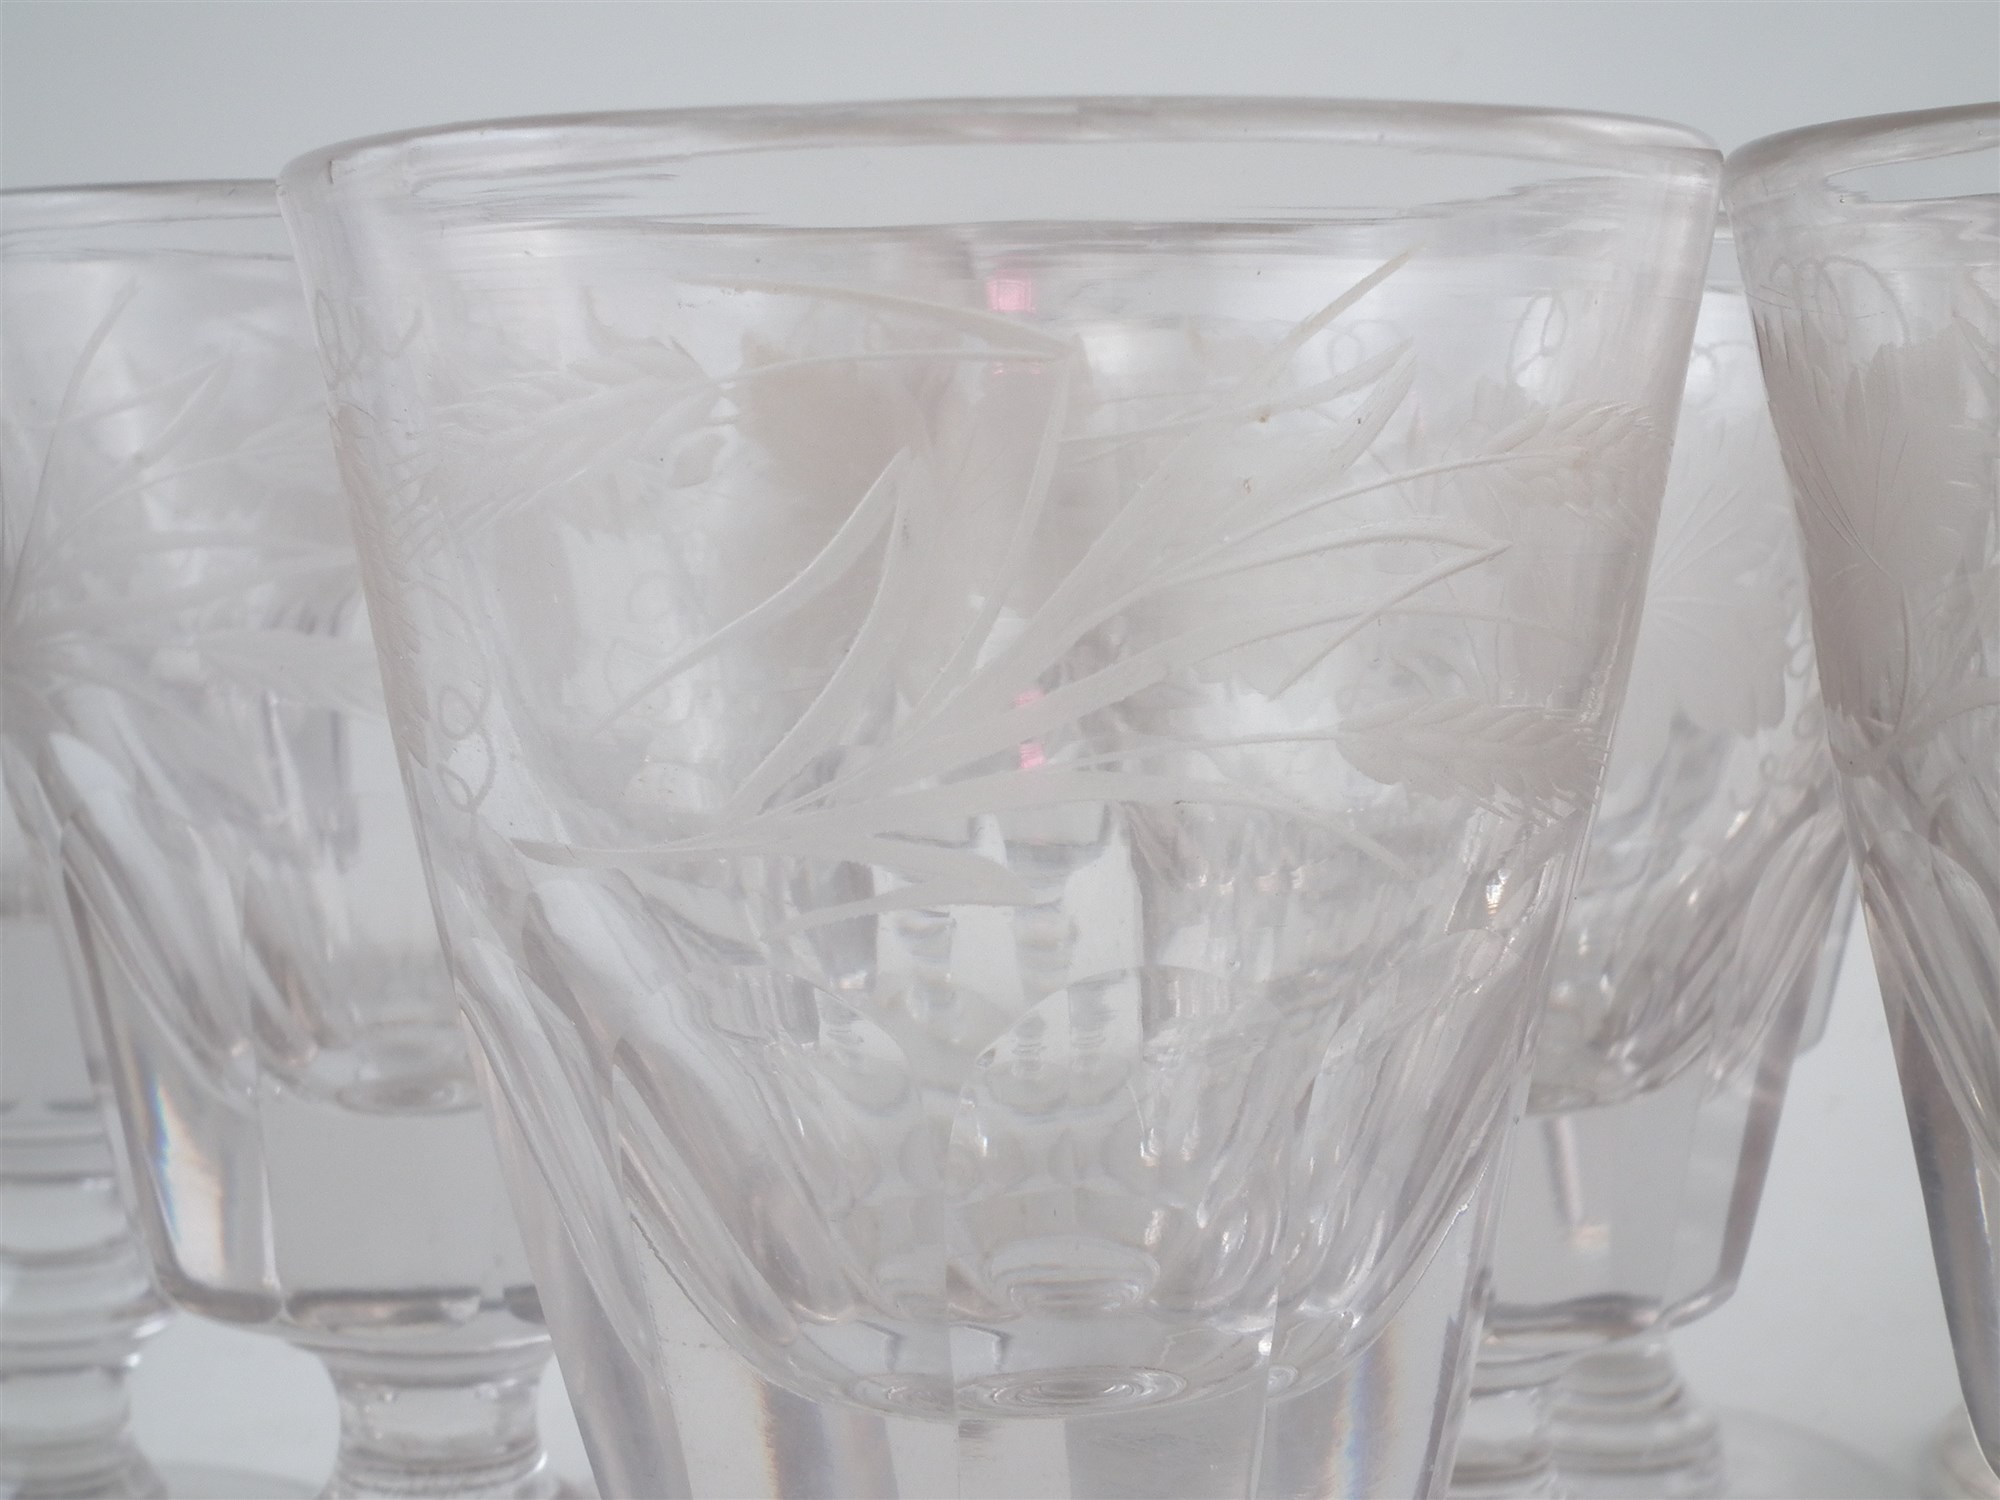 Nine mid 19th century ale glasses , the bowls engraved with hops, leaves and barley, 12.5cm high For - Image 2 of 4